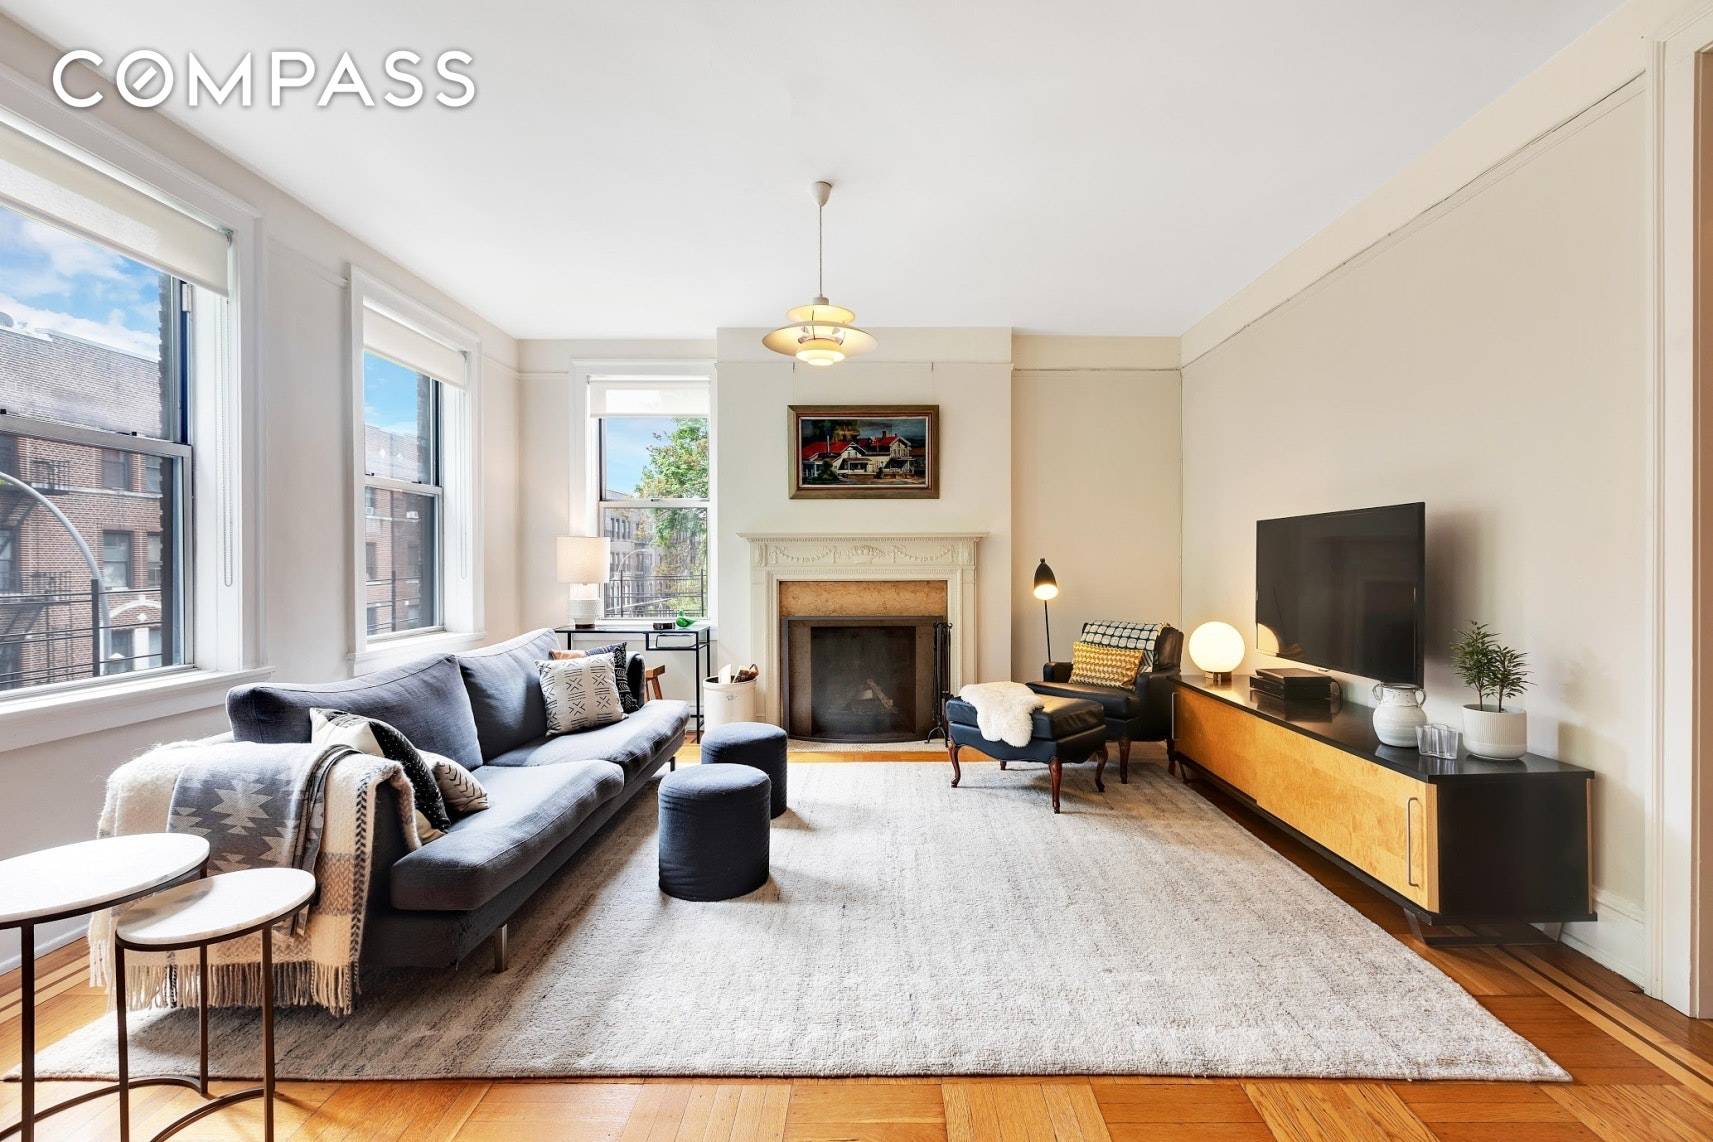 Space and light permeates this renovated, landmarked pre war five room co op with a fireplace in the much sought after historic district of Jackson Heights.